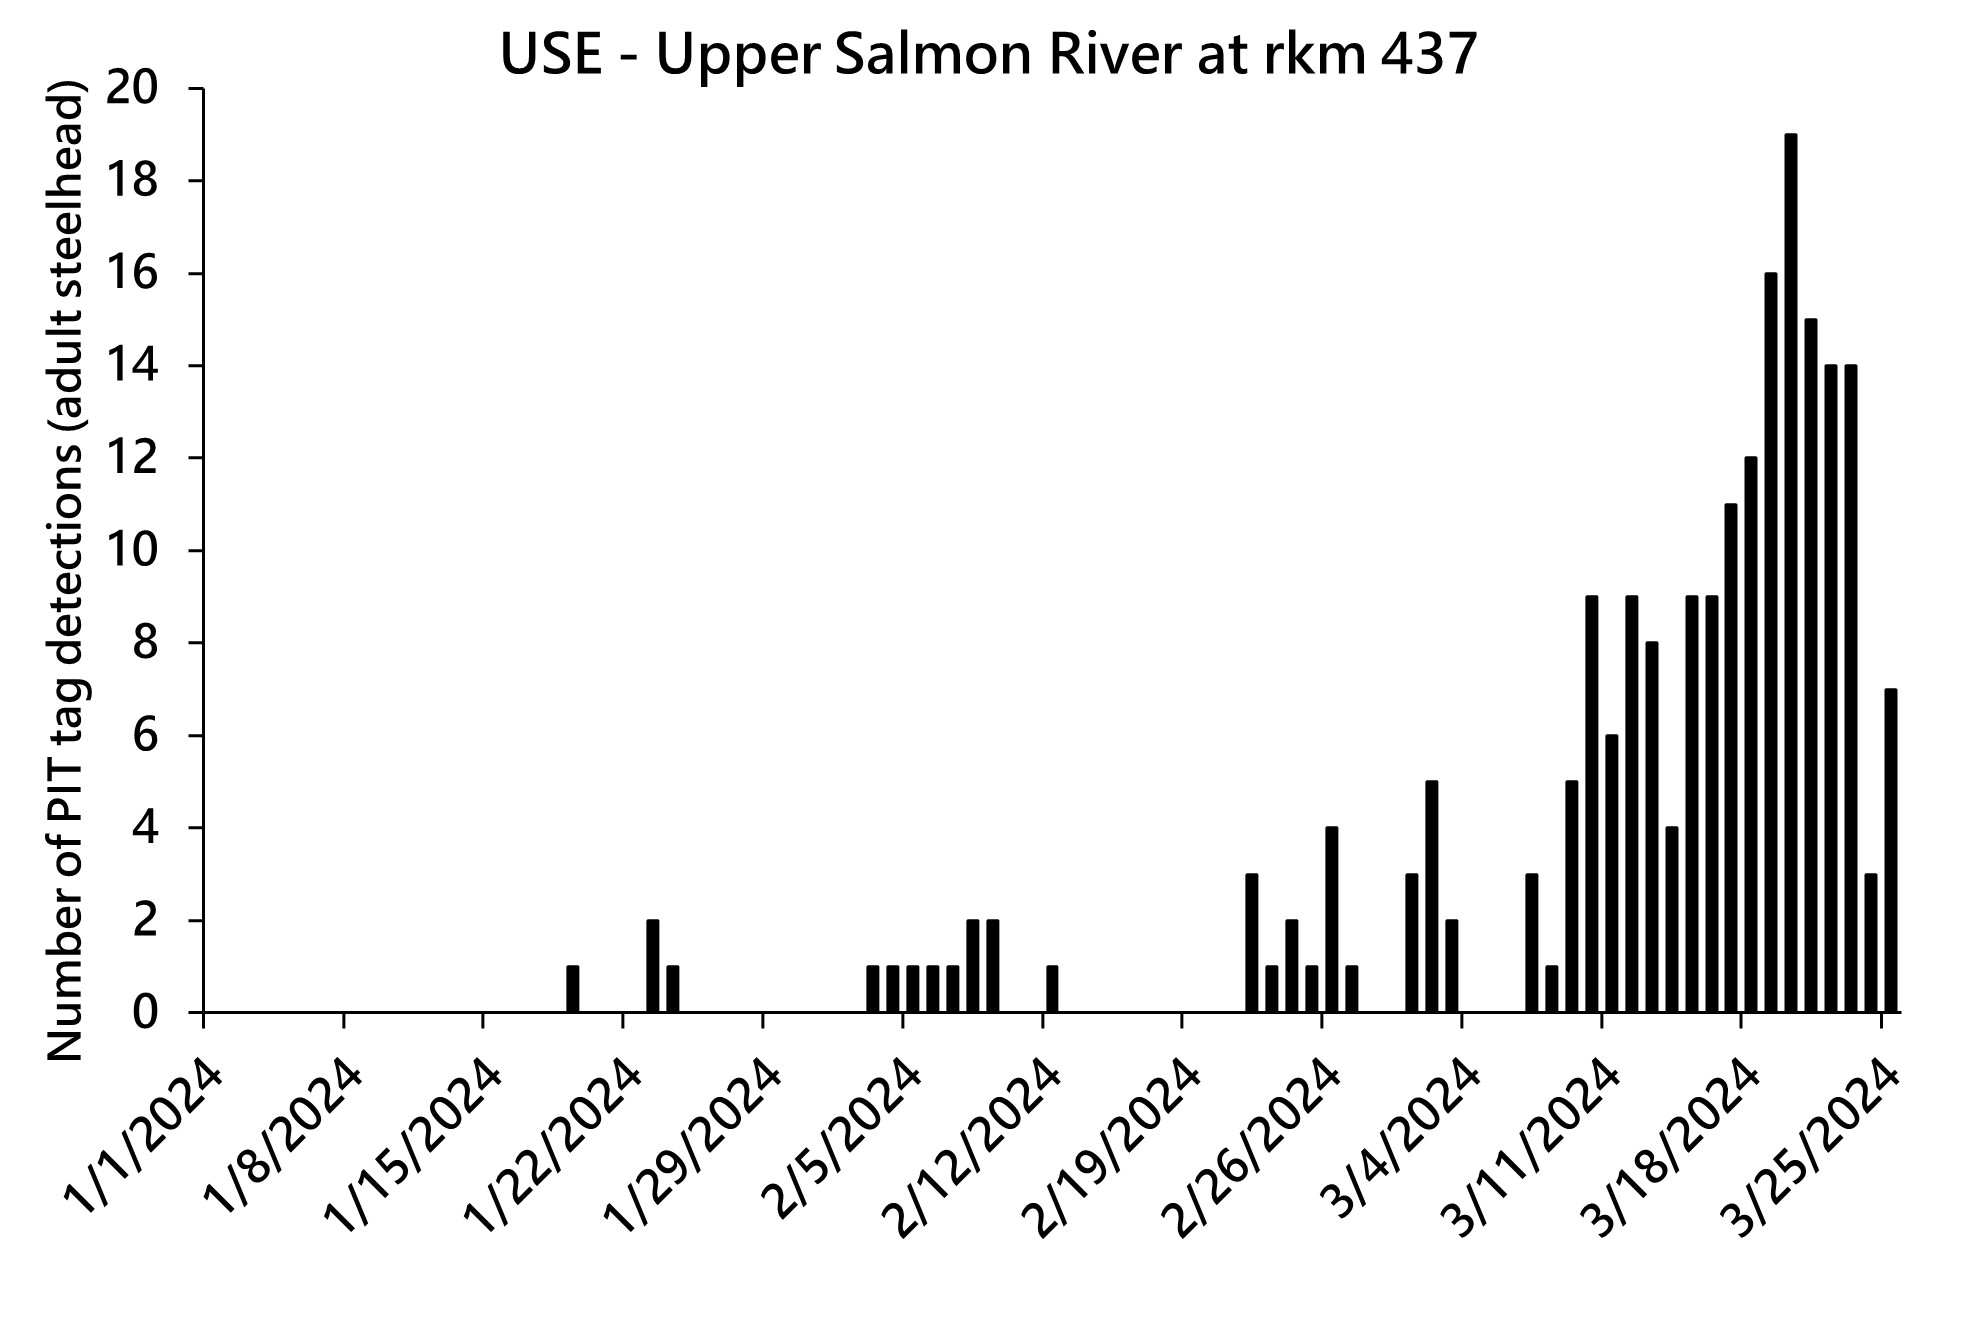 Figure showing PIT tag detections of adult steelhead at the USE site (11 miles upstream of Salmon, ID) between 1/01/2024 and 3/25/2024.